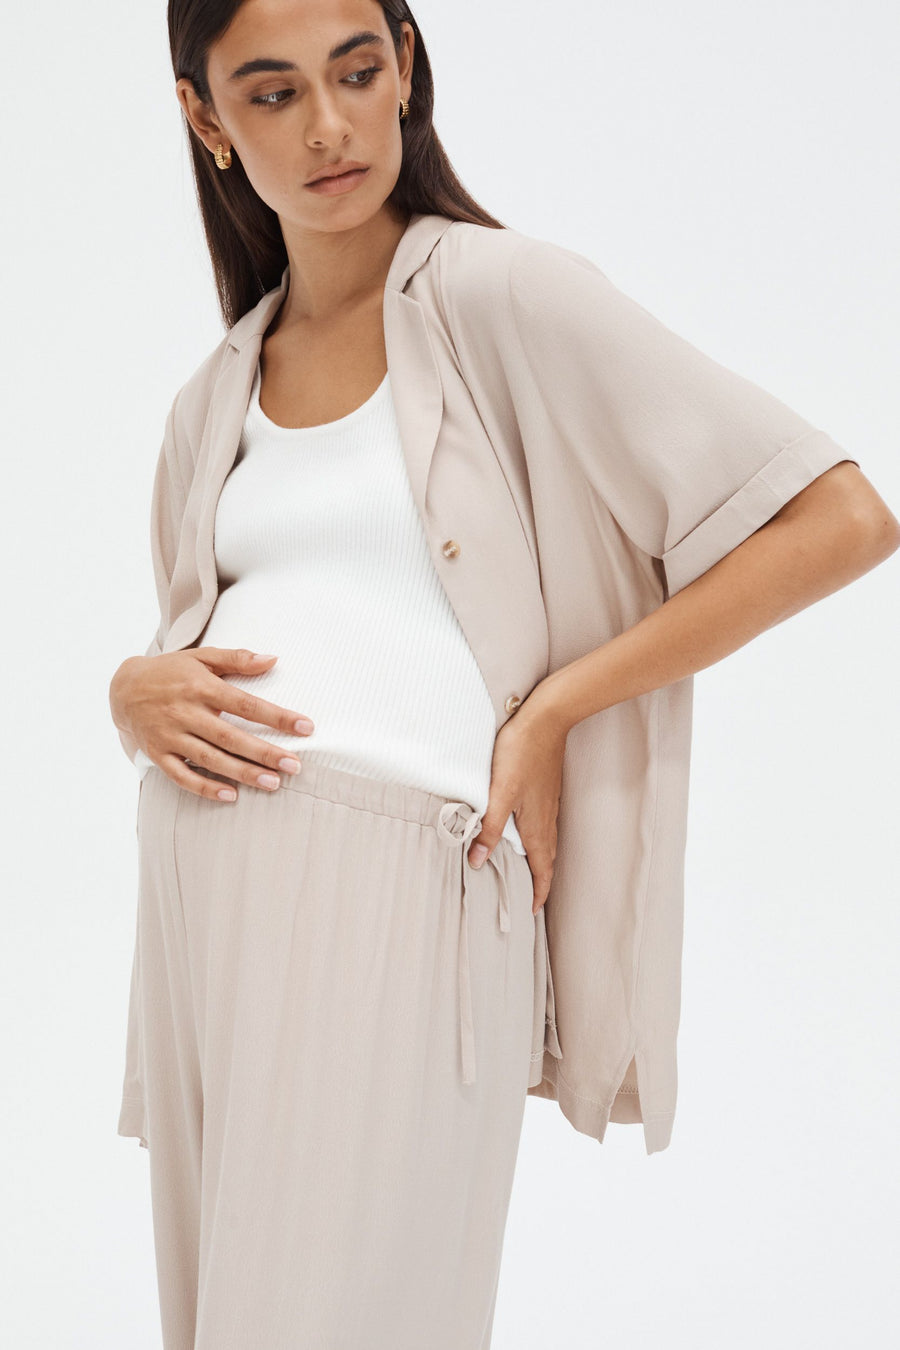 Babymoon Outfit (Neutral) 2